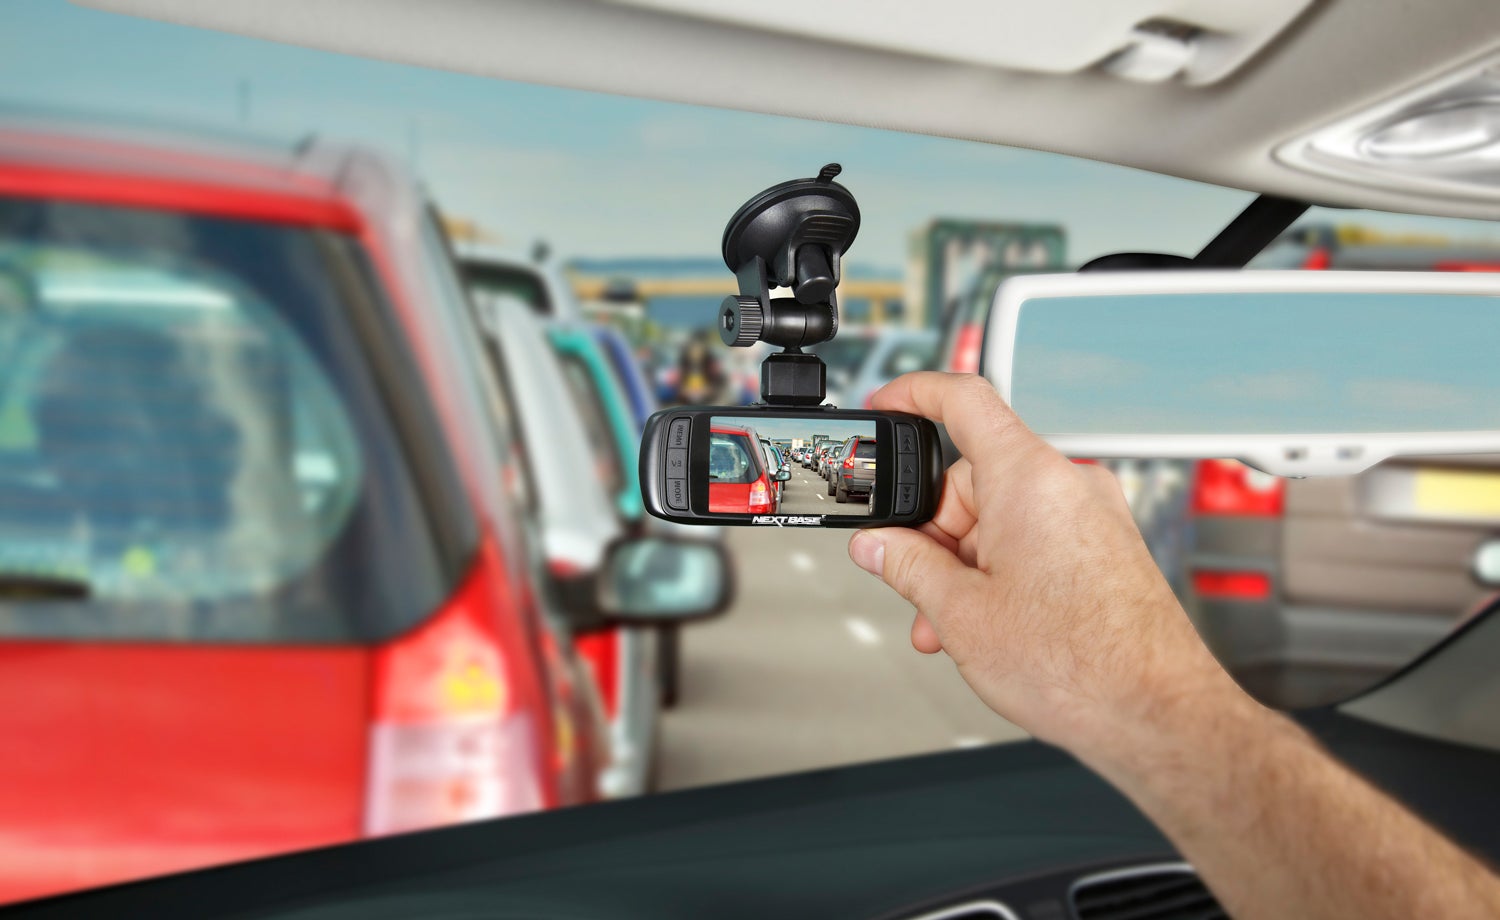 Dashboard camera videos: From Taiwan to Russia, who uses dashcams and why, The Independent